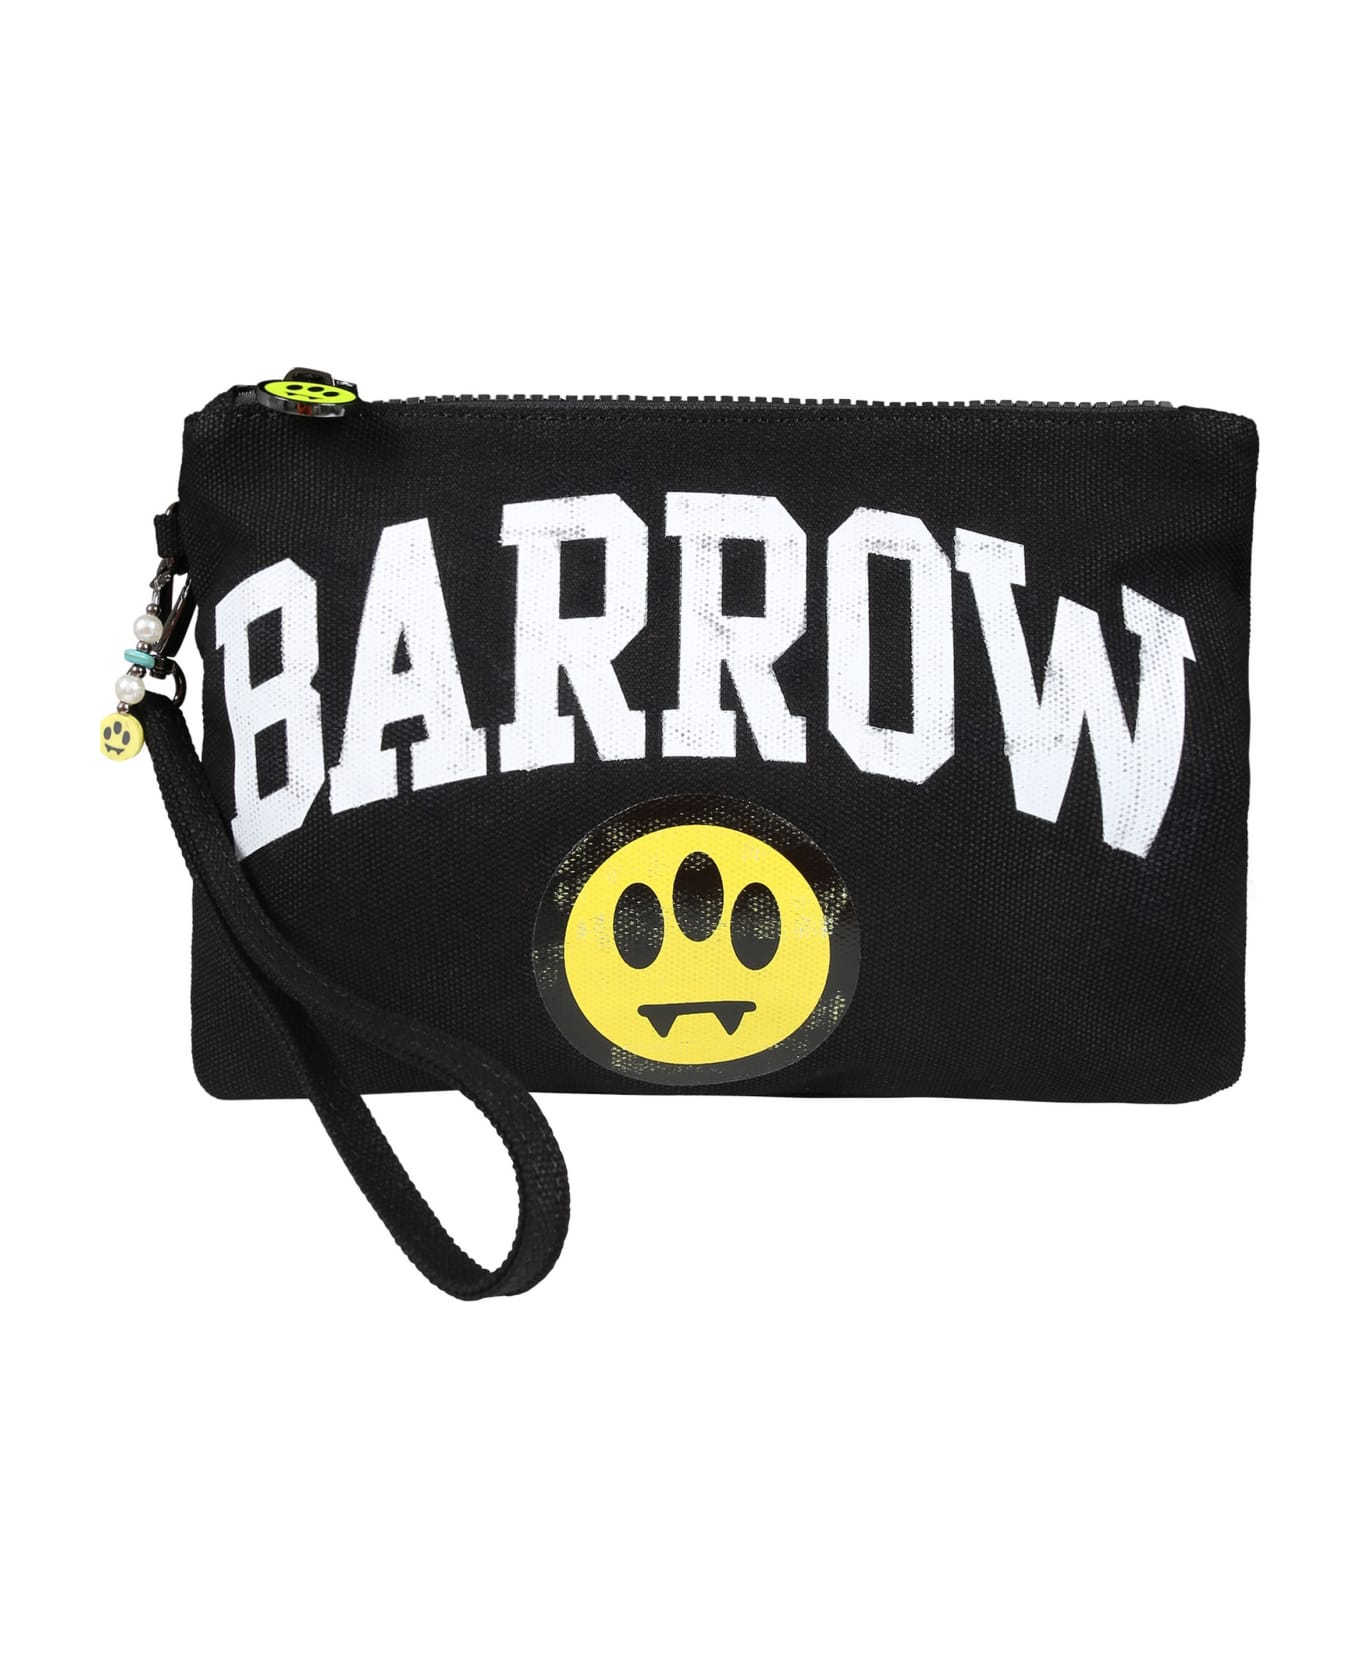 Barrow Black Clutch Bag For Girl With Logo And Smiley - Black